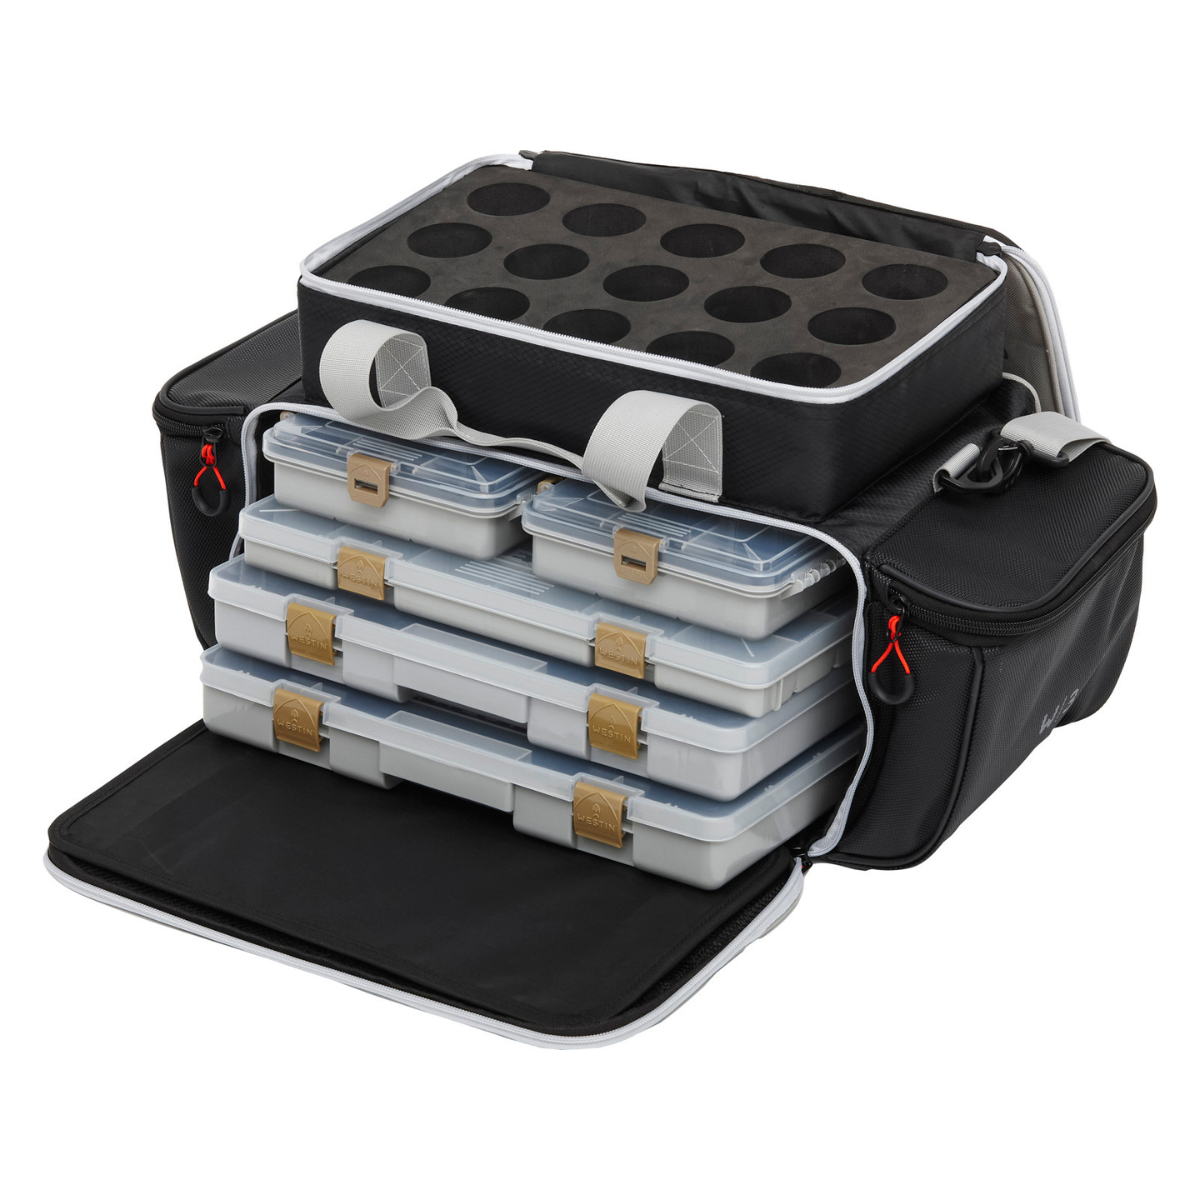 Westin W3 P&T Master Bag Cases showing 